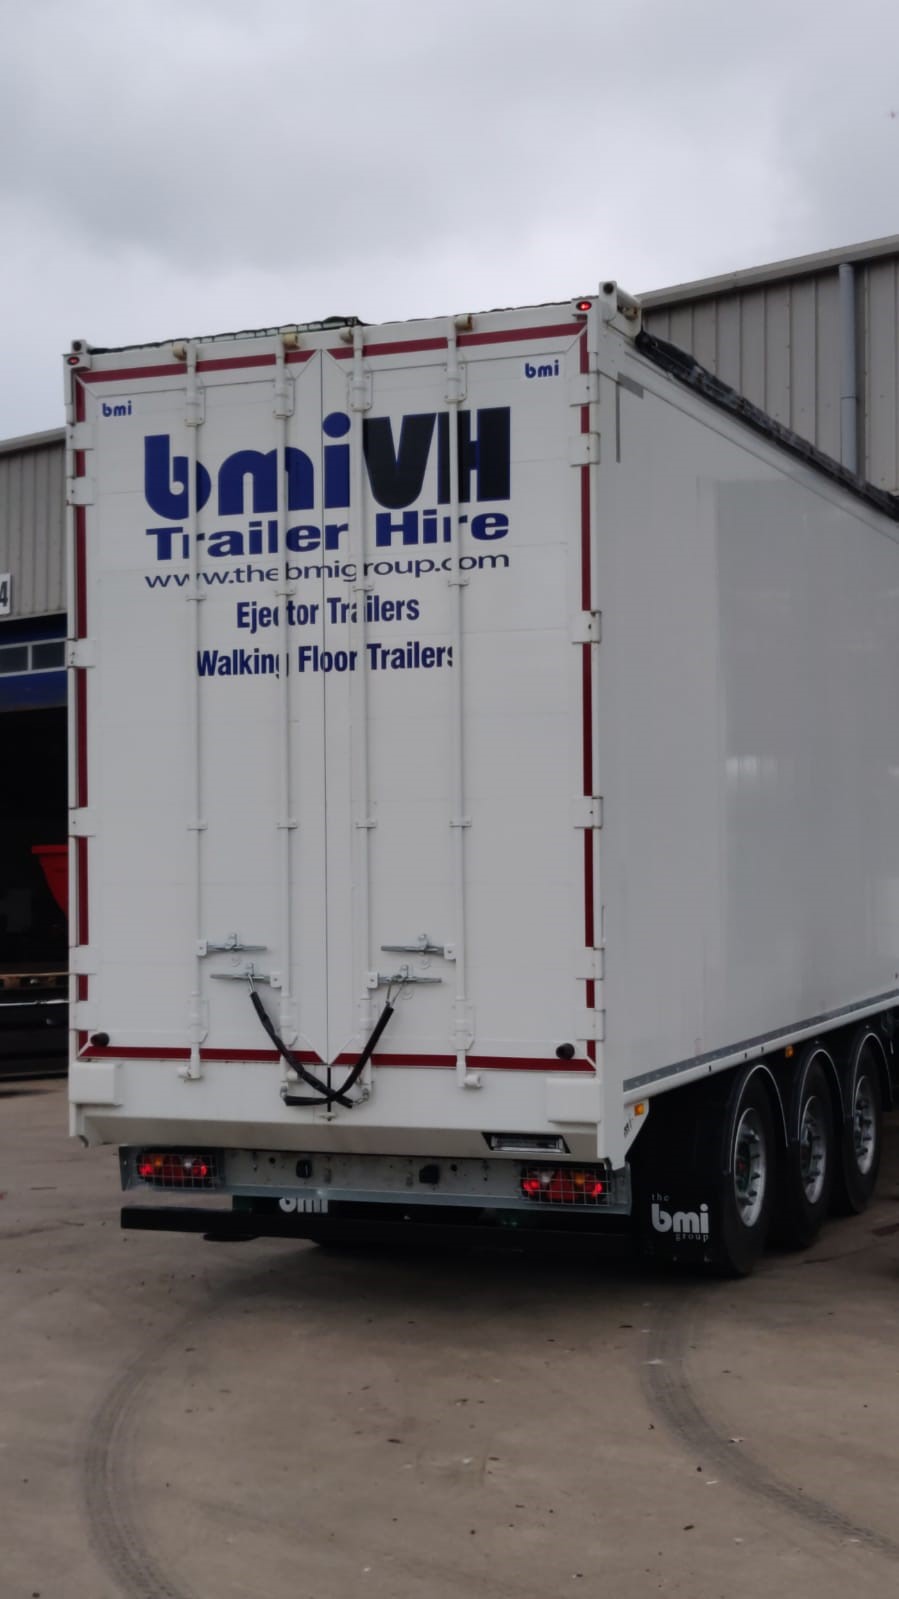 Available to Hire now - call Andy on 07483 103086